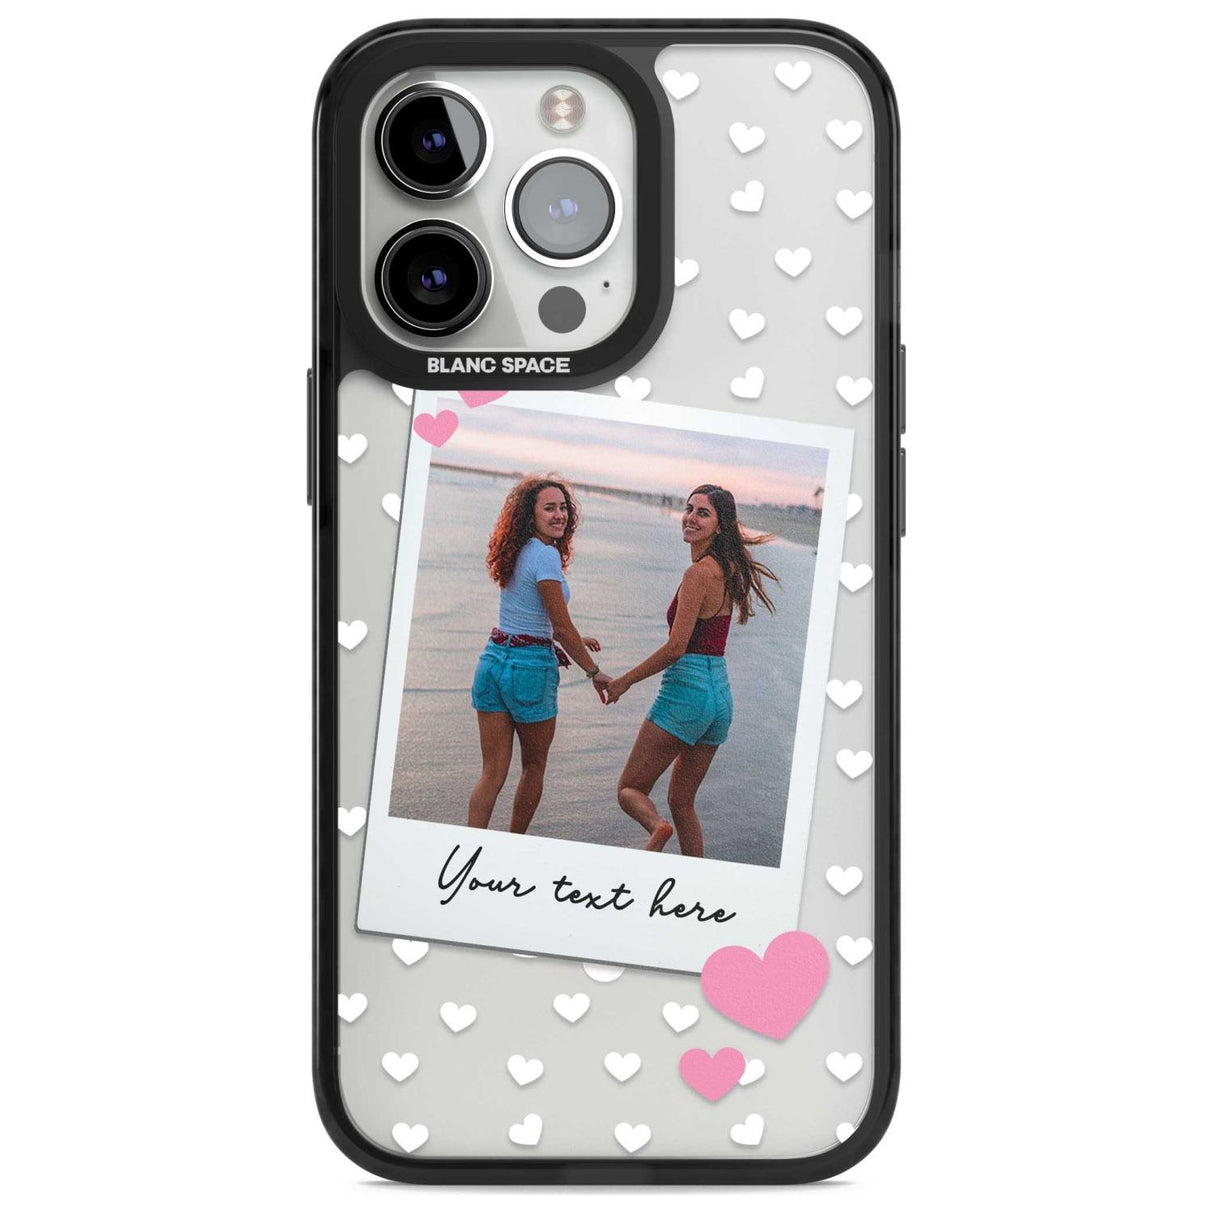 Personalised Instant Film & Hearts Photo Custom Phone Case iPhone 15 Pro Max / Magsafe Black Impact Case,iPhone 15 Pro / Magsafe Black Impact Case,iPhone 14 Pro Max / Magsafe Black Impact Case,iPhone 14 Pro / Magsafe Black Impact Case,iPhone 13 Pro / Magsafe Black Impact Case Blanc Space